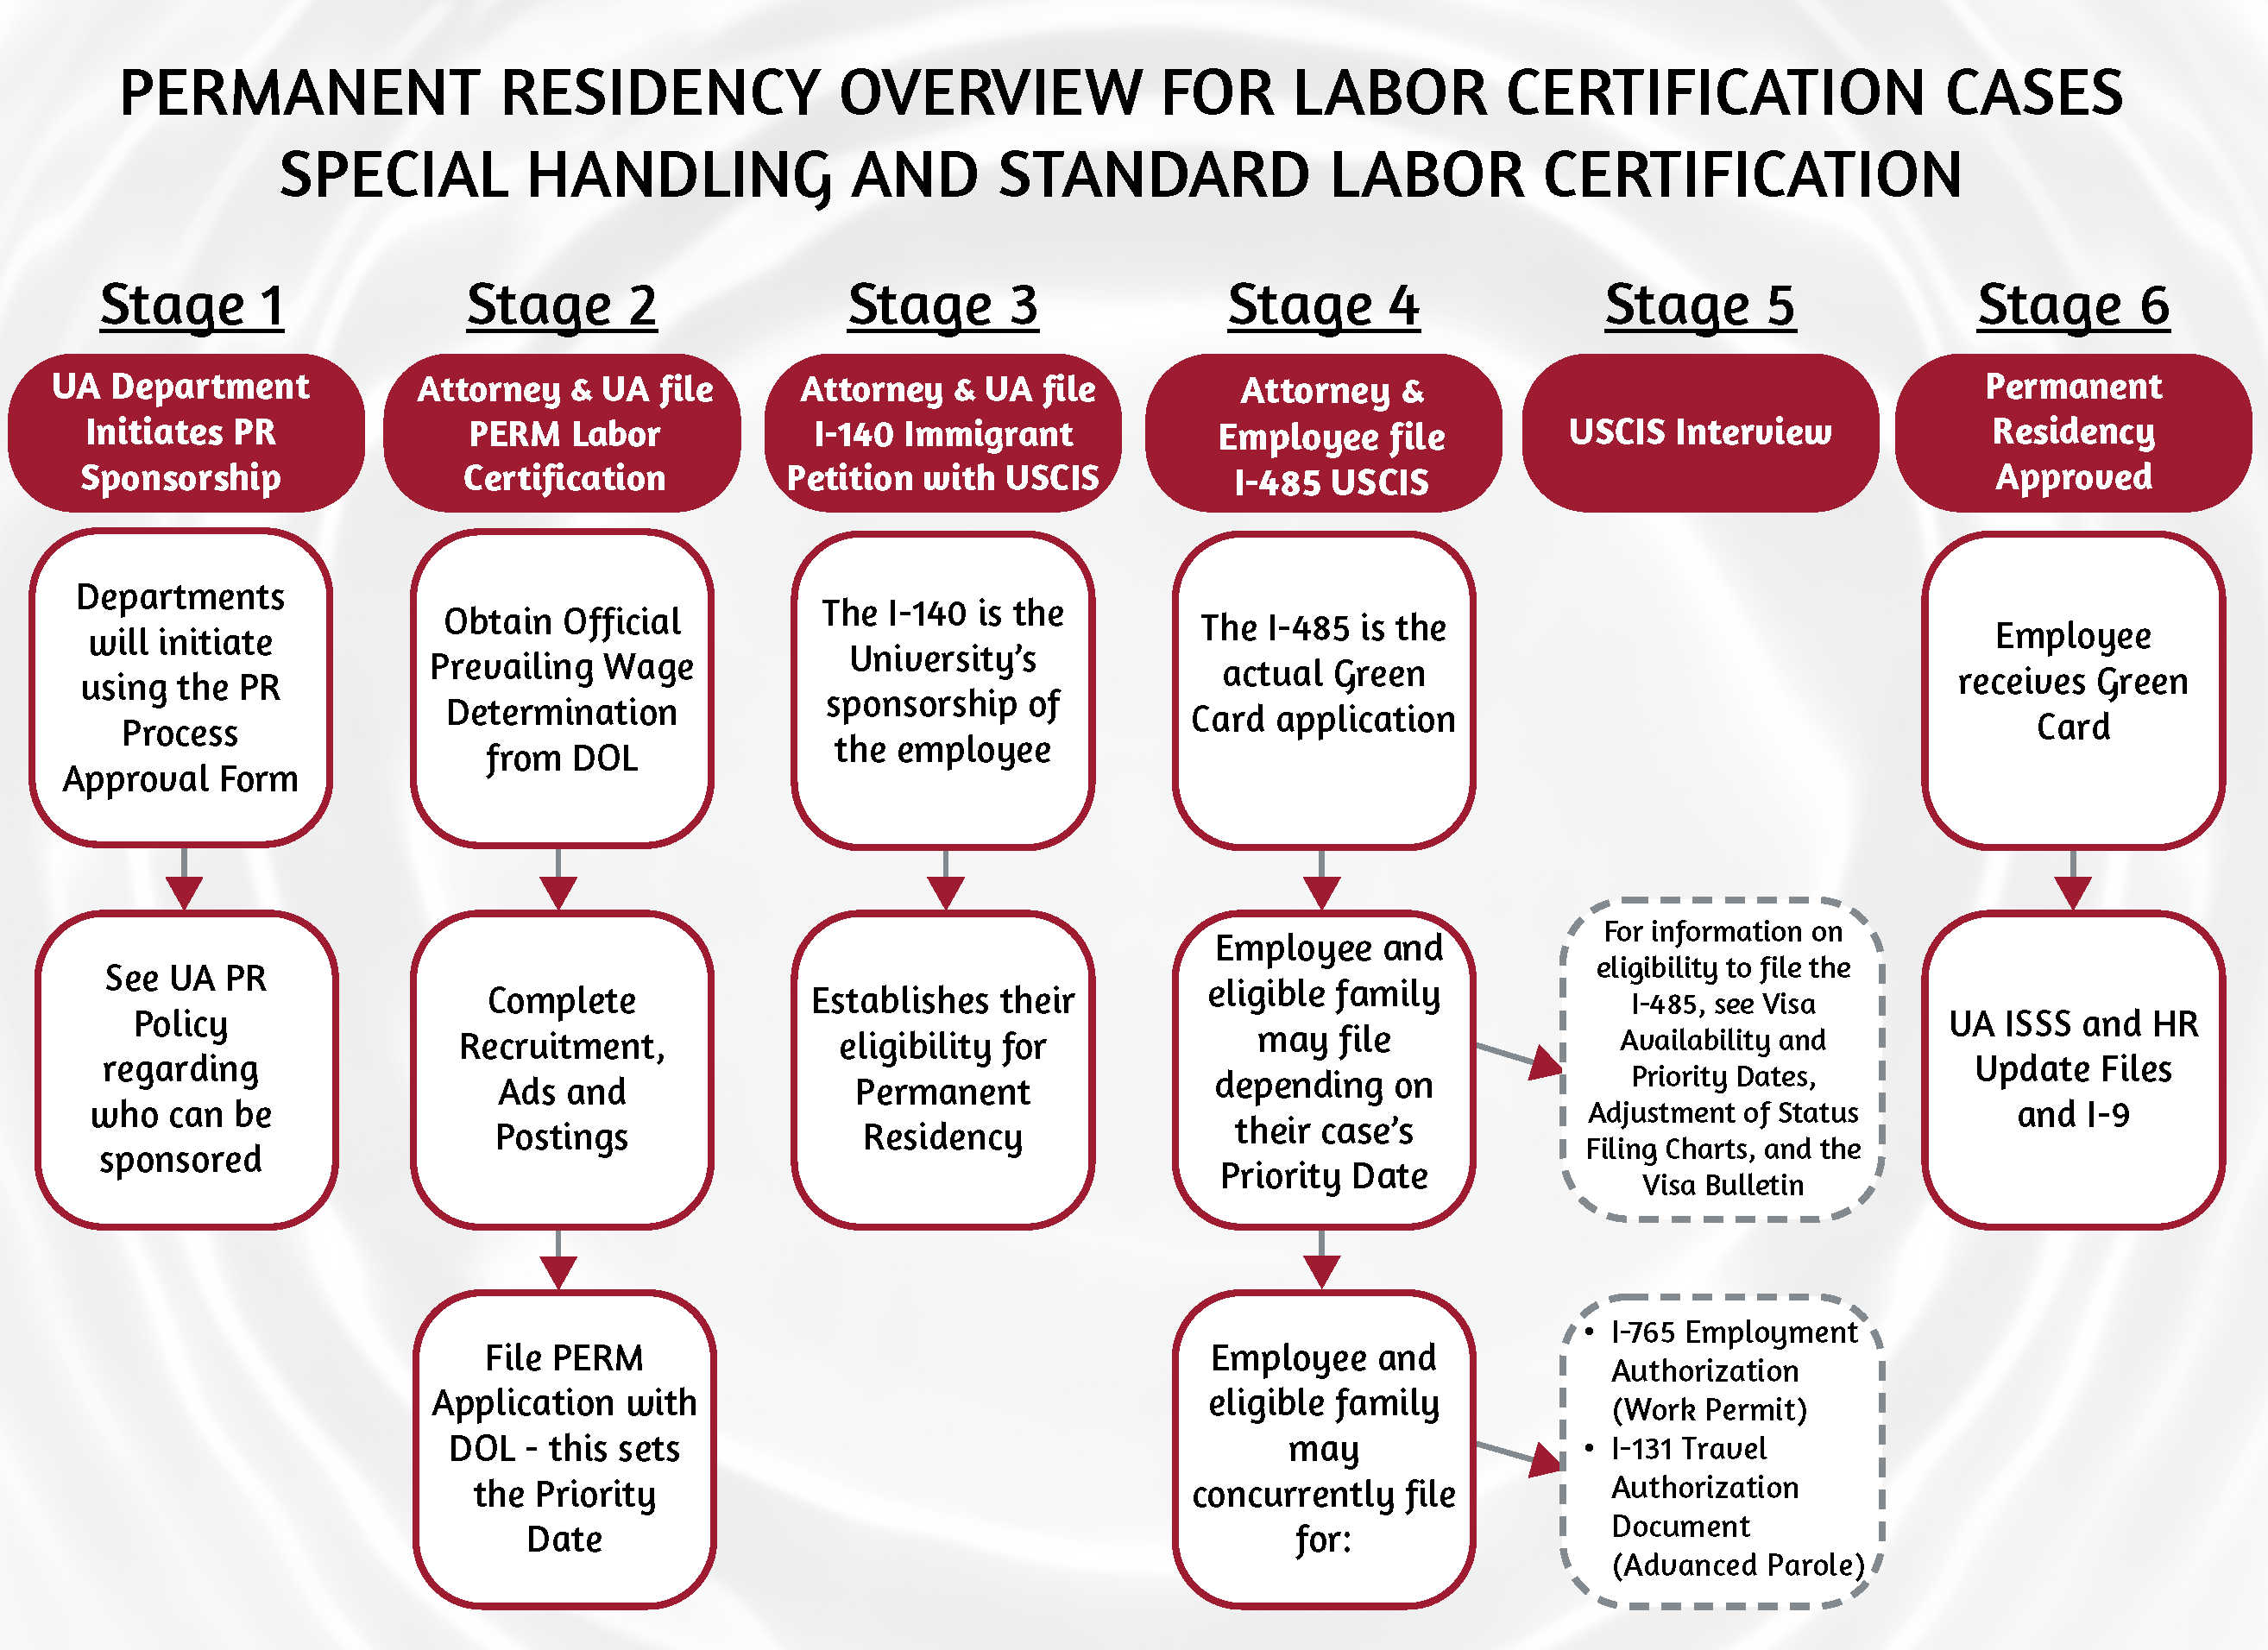 PR Stages Overview - Special Handling and Standard Labor Certification